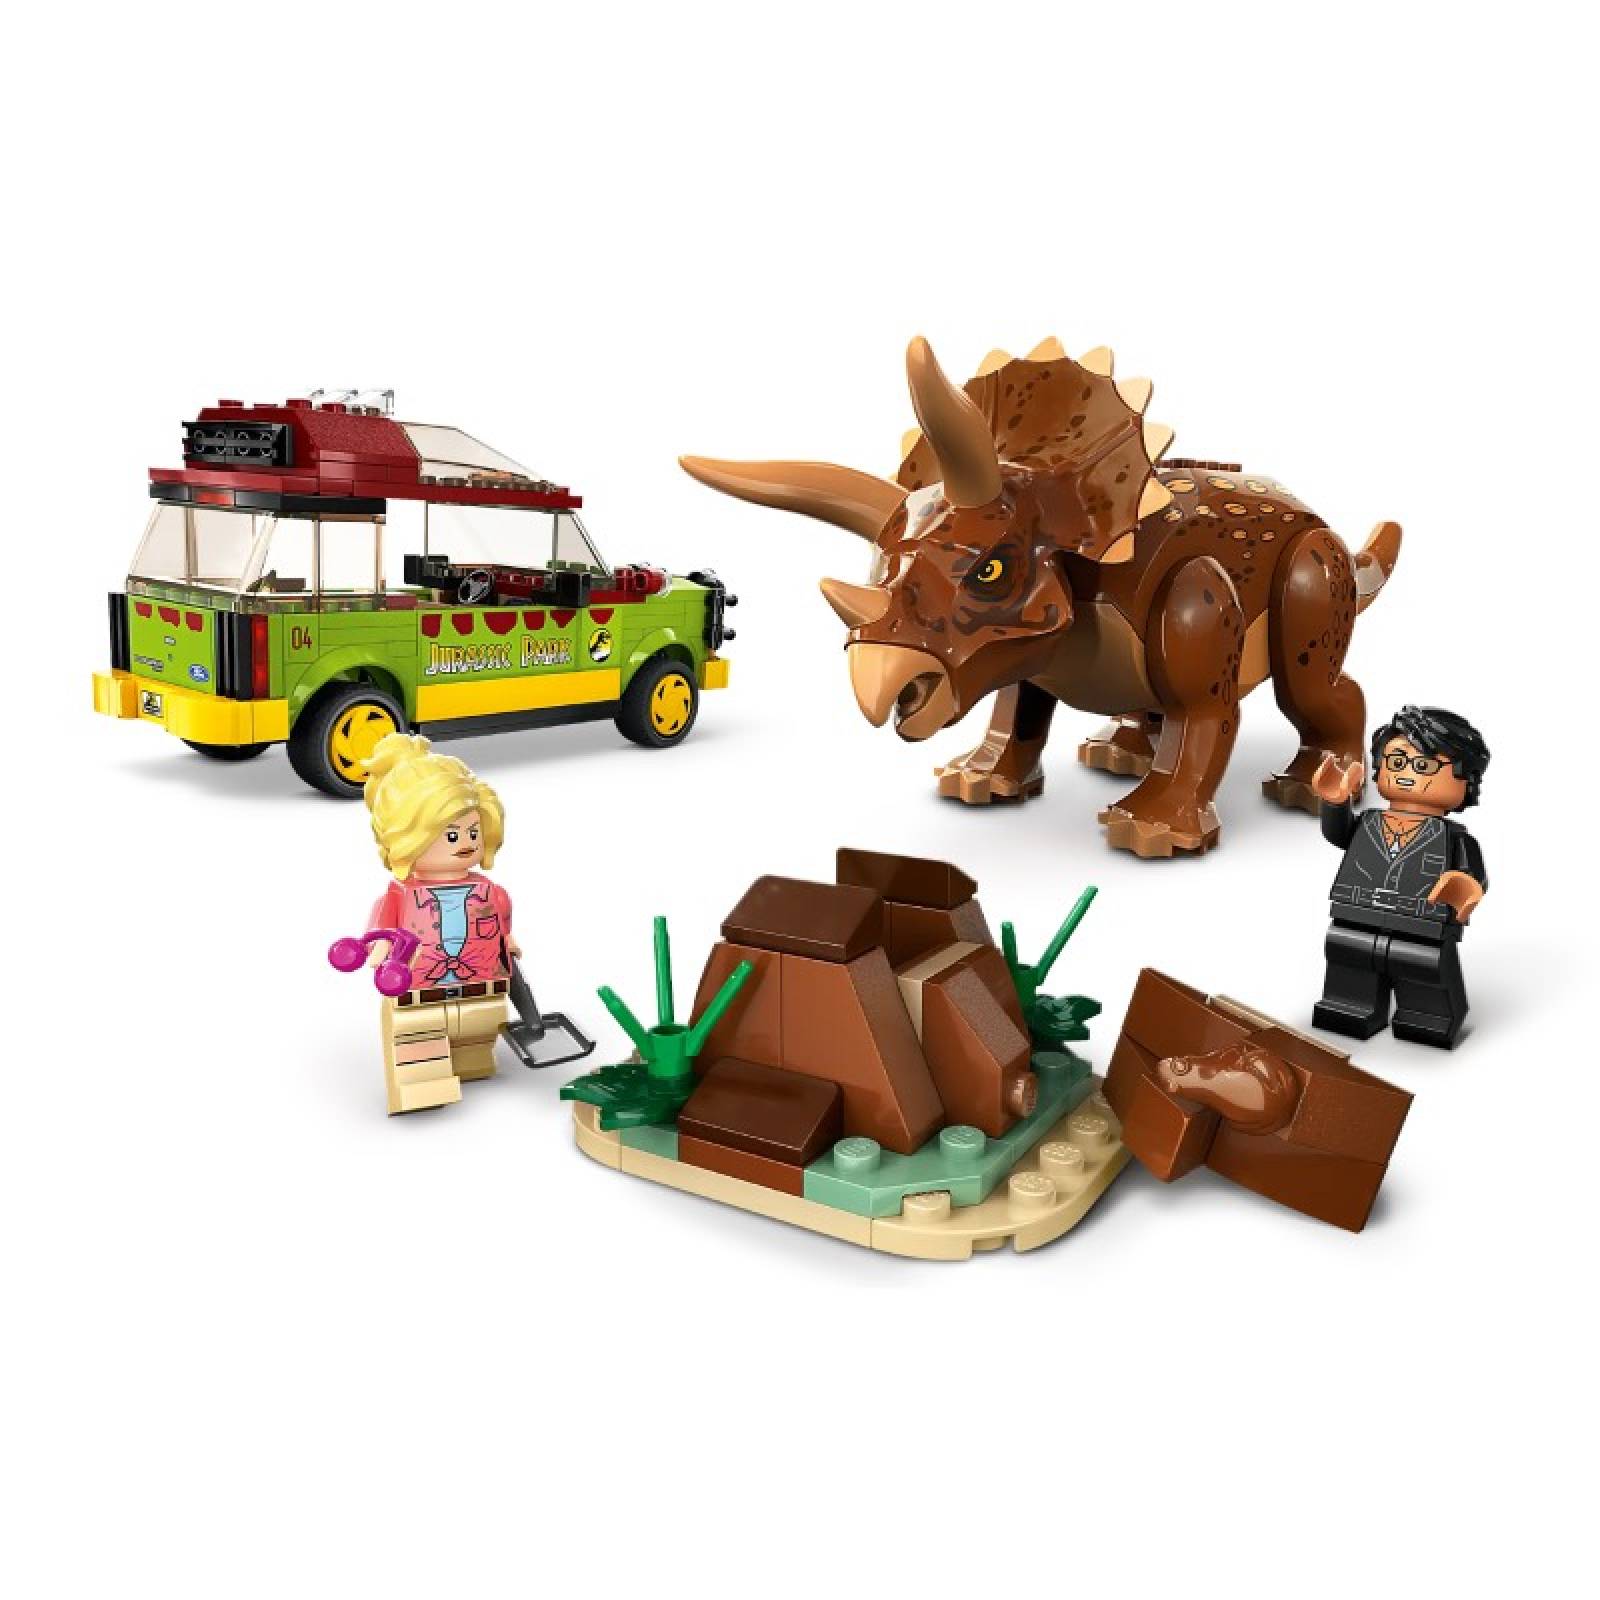 LEGO Jurassic World Triceratops Research 76959 8+ thumbnails